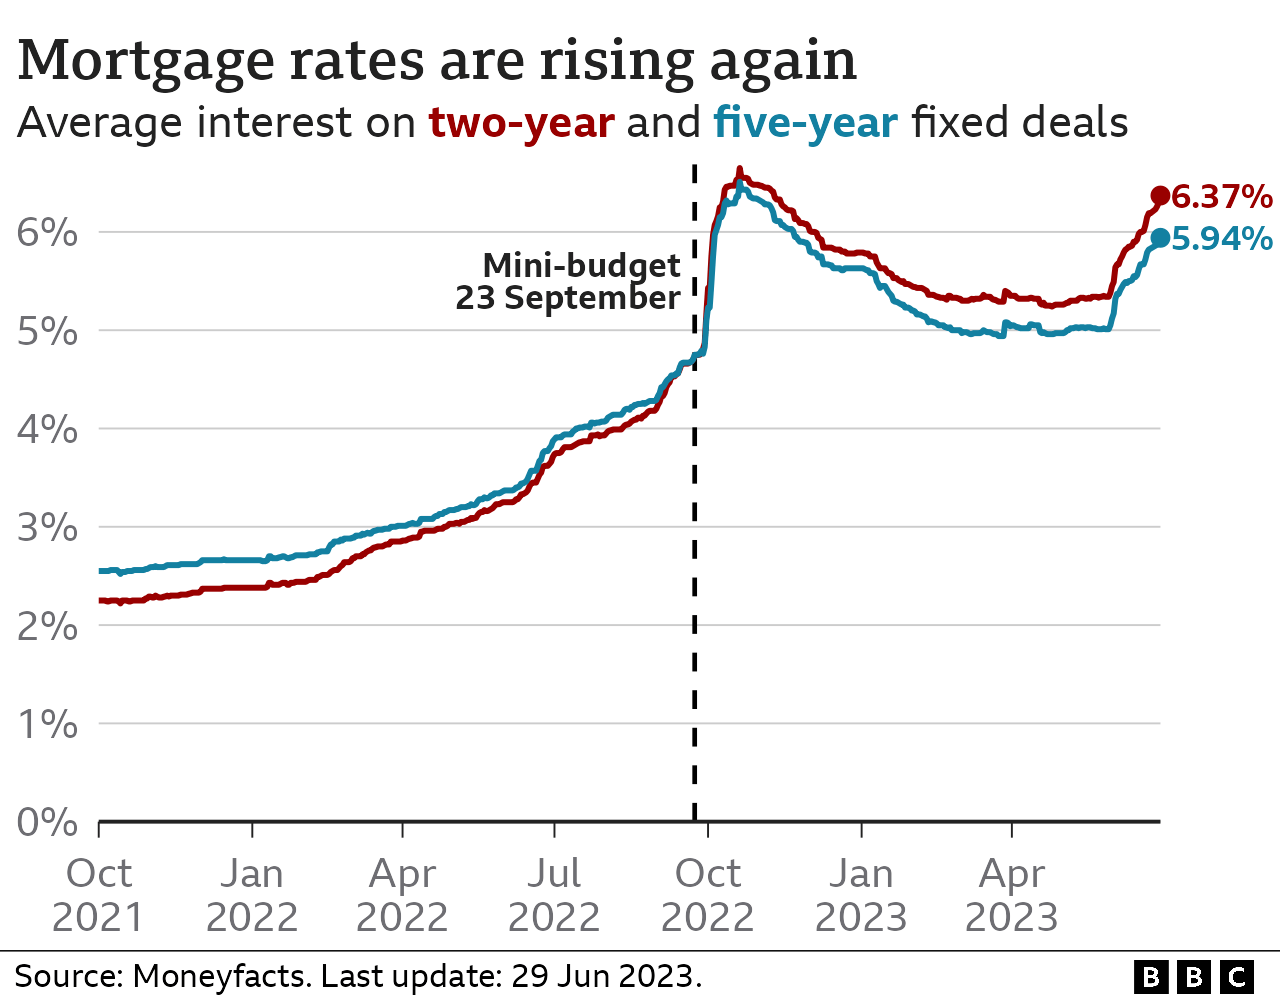 Line chart showing the average interest rate charged on two-year and five-year fixed deals. The two-year rate was 6.37 percent on 29 Jun 2023, and it peaked at 6.65 percent in October 2022. The five-year rate was 5.94 percent, and it peaked at 6.51 percent.